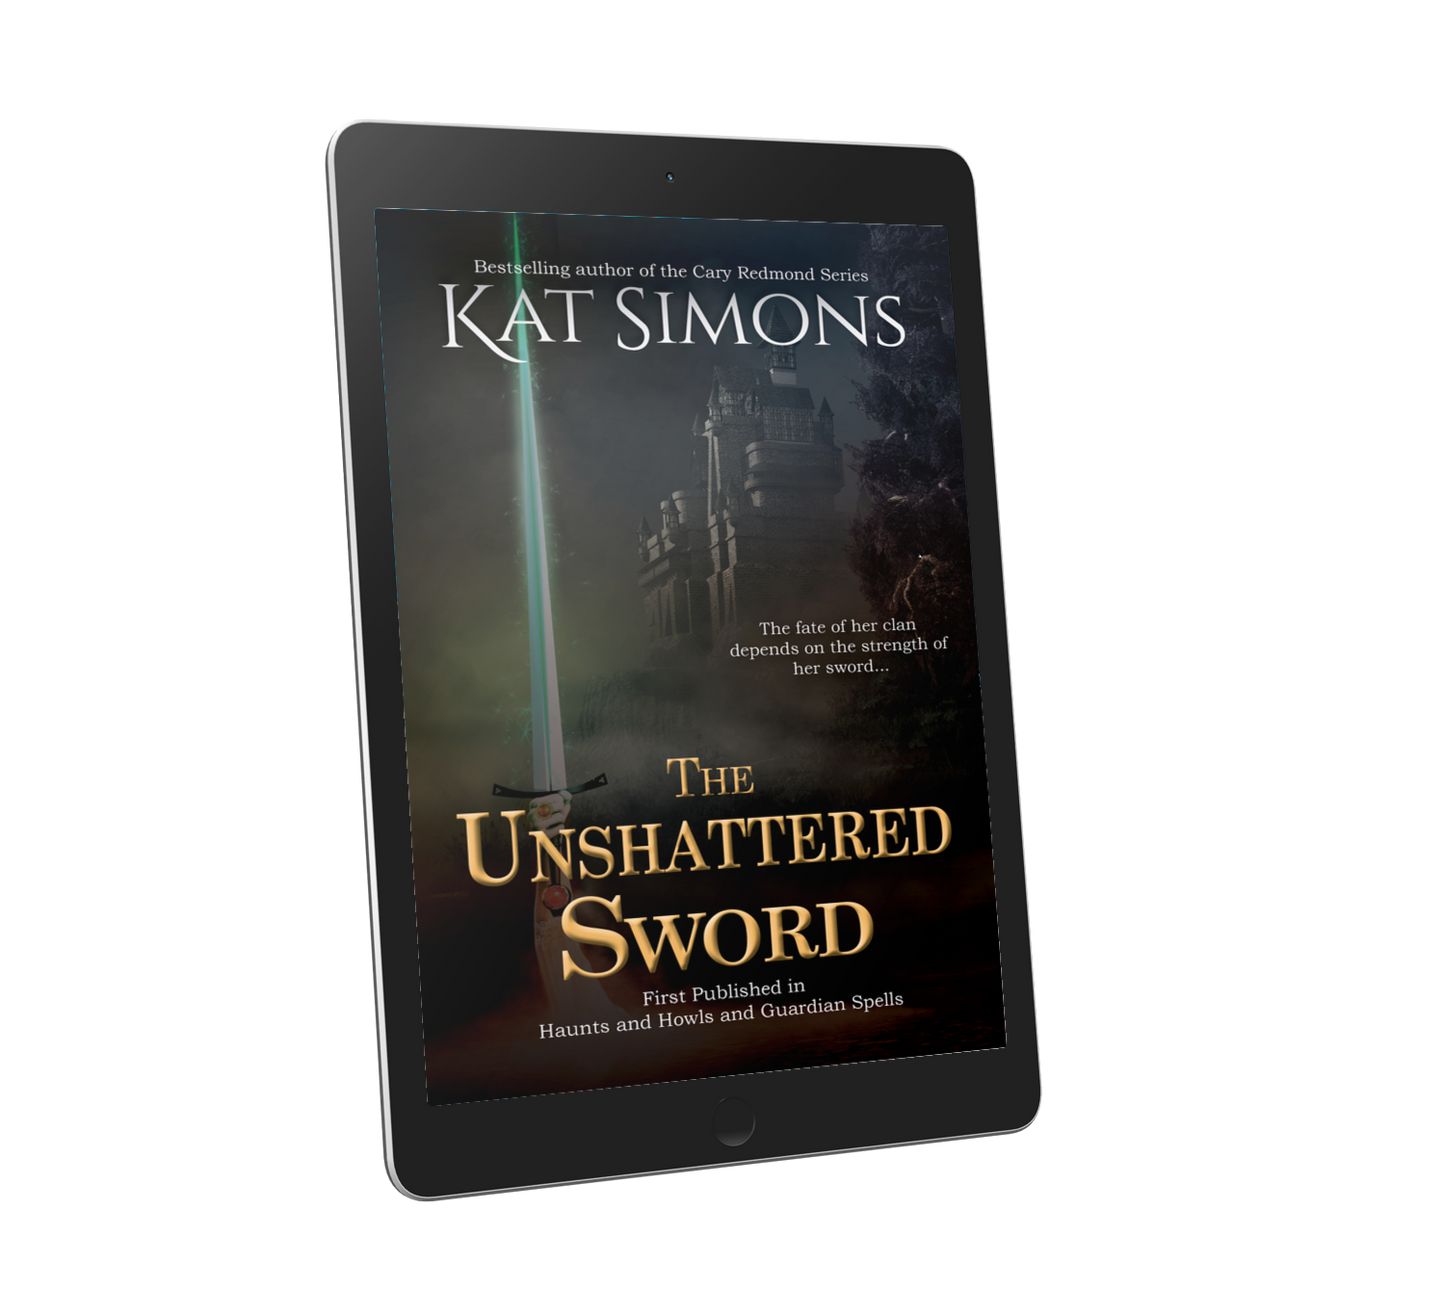 The Unshattered Sword